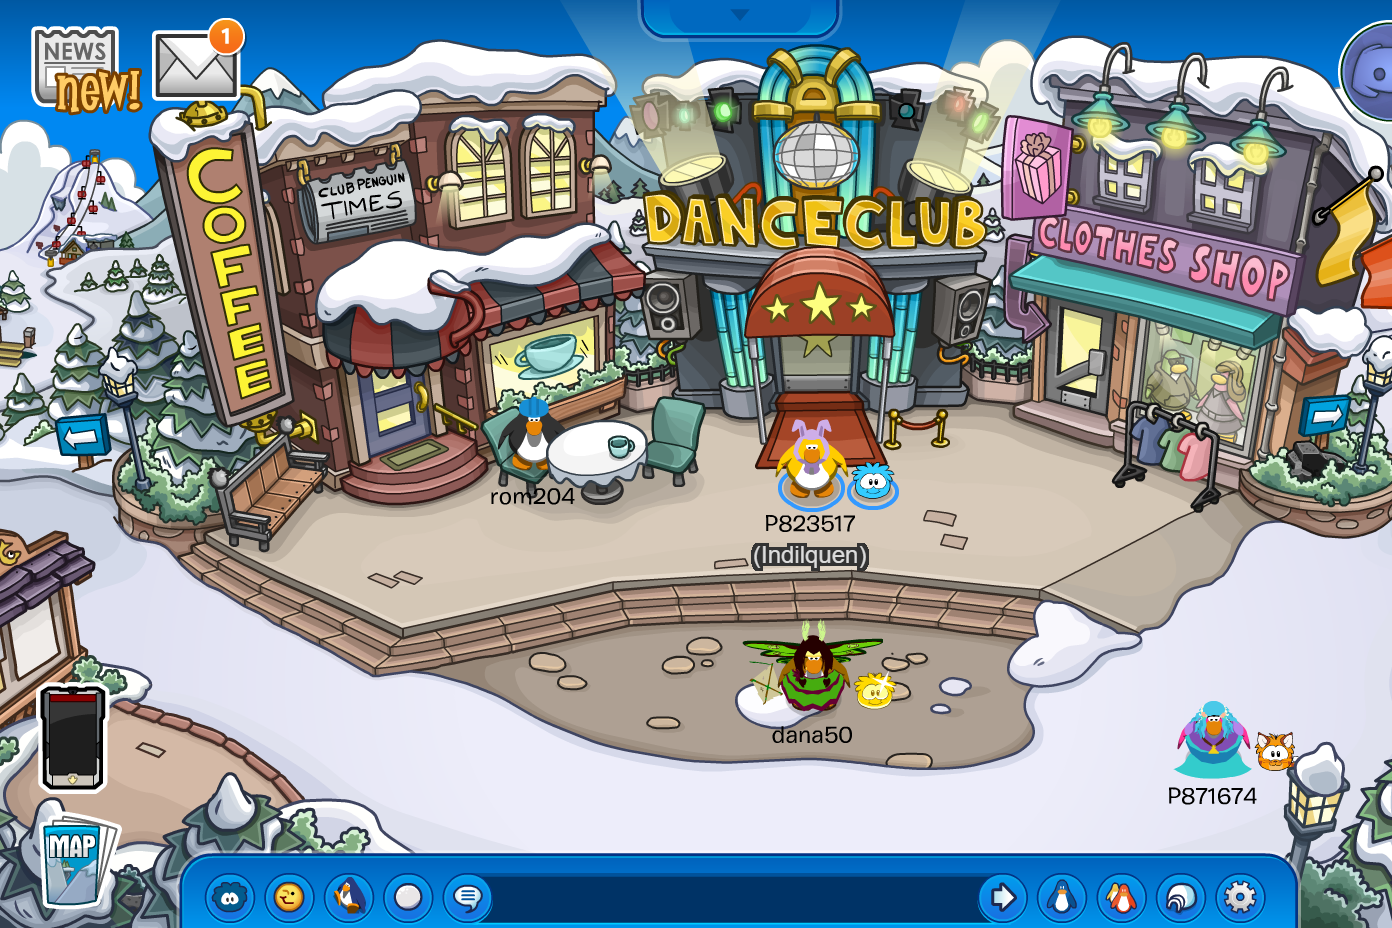 A cartoon town square featuring a café, a dance club, and clothes shop. Snow covered trees and mountains are in the distance. Four cartoon penguins stand in the square: one wears a hard hat, one wears bunny ears, another wears a long blue wig, and the fourth wears wings.